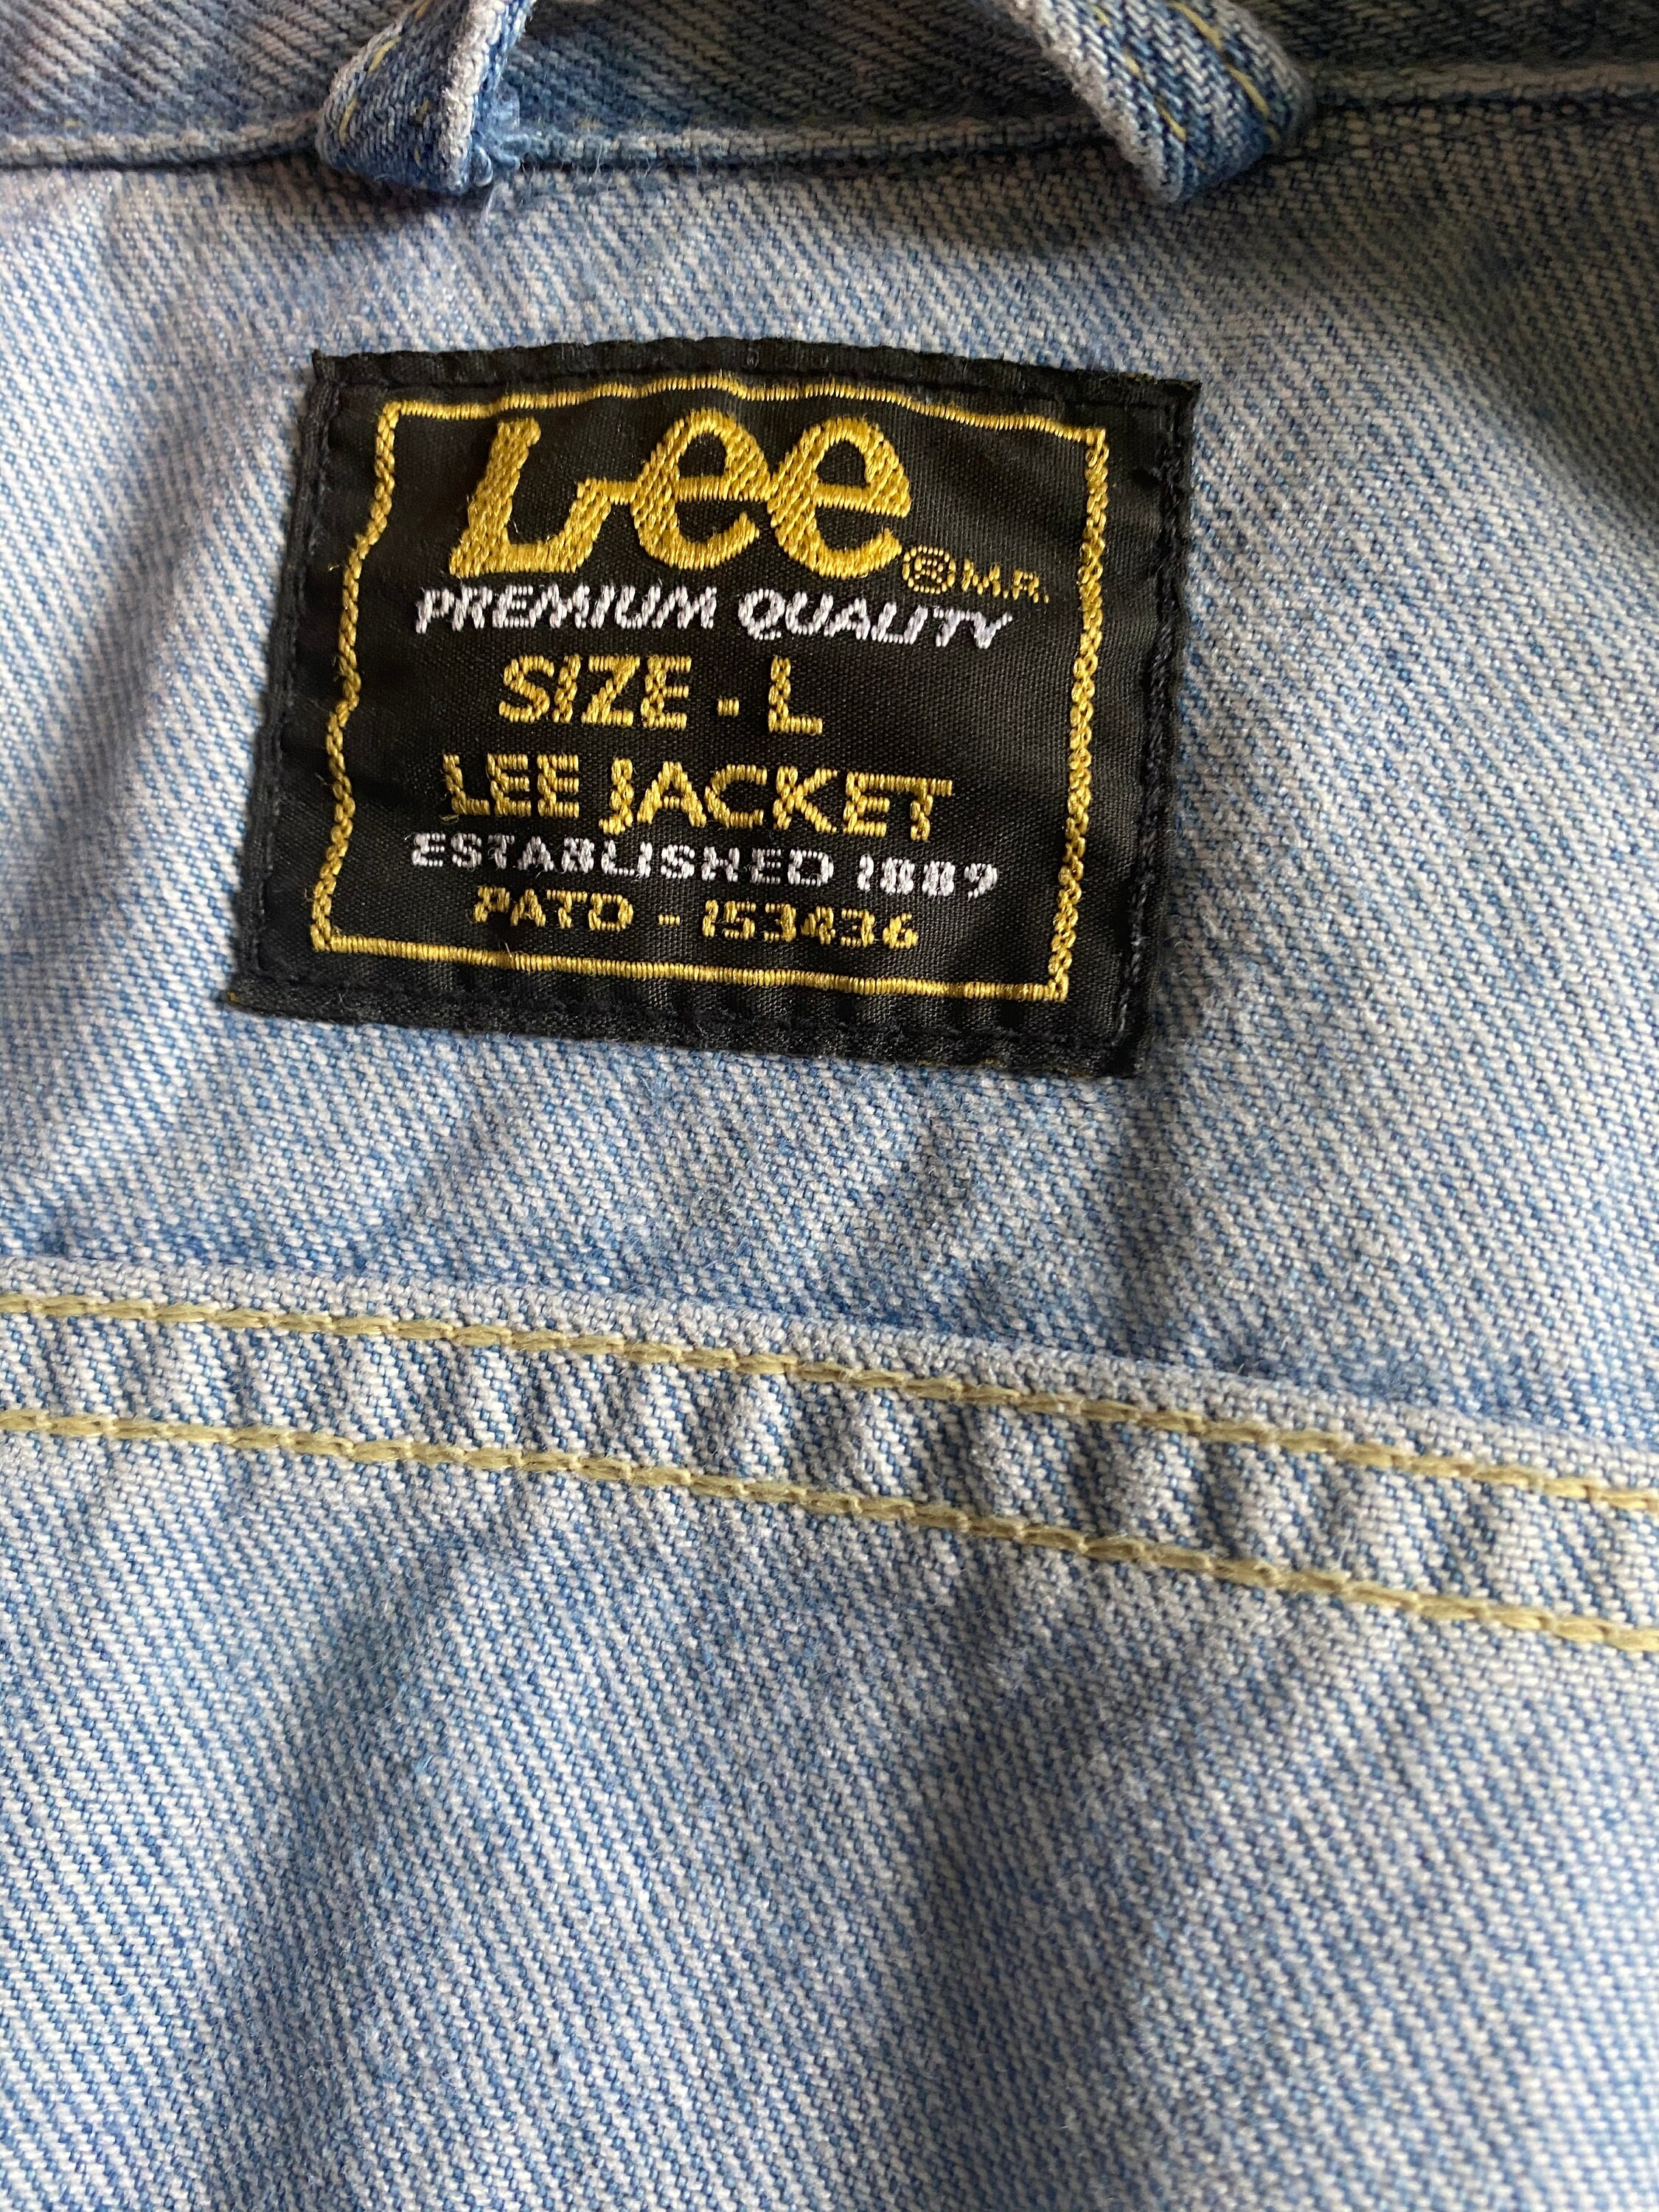 Vintage Lee Denim Jacket in a Bleached Wash and Trucker Style - Etsy